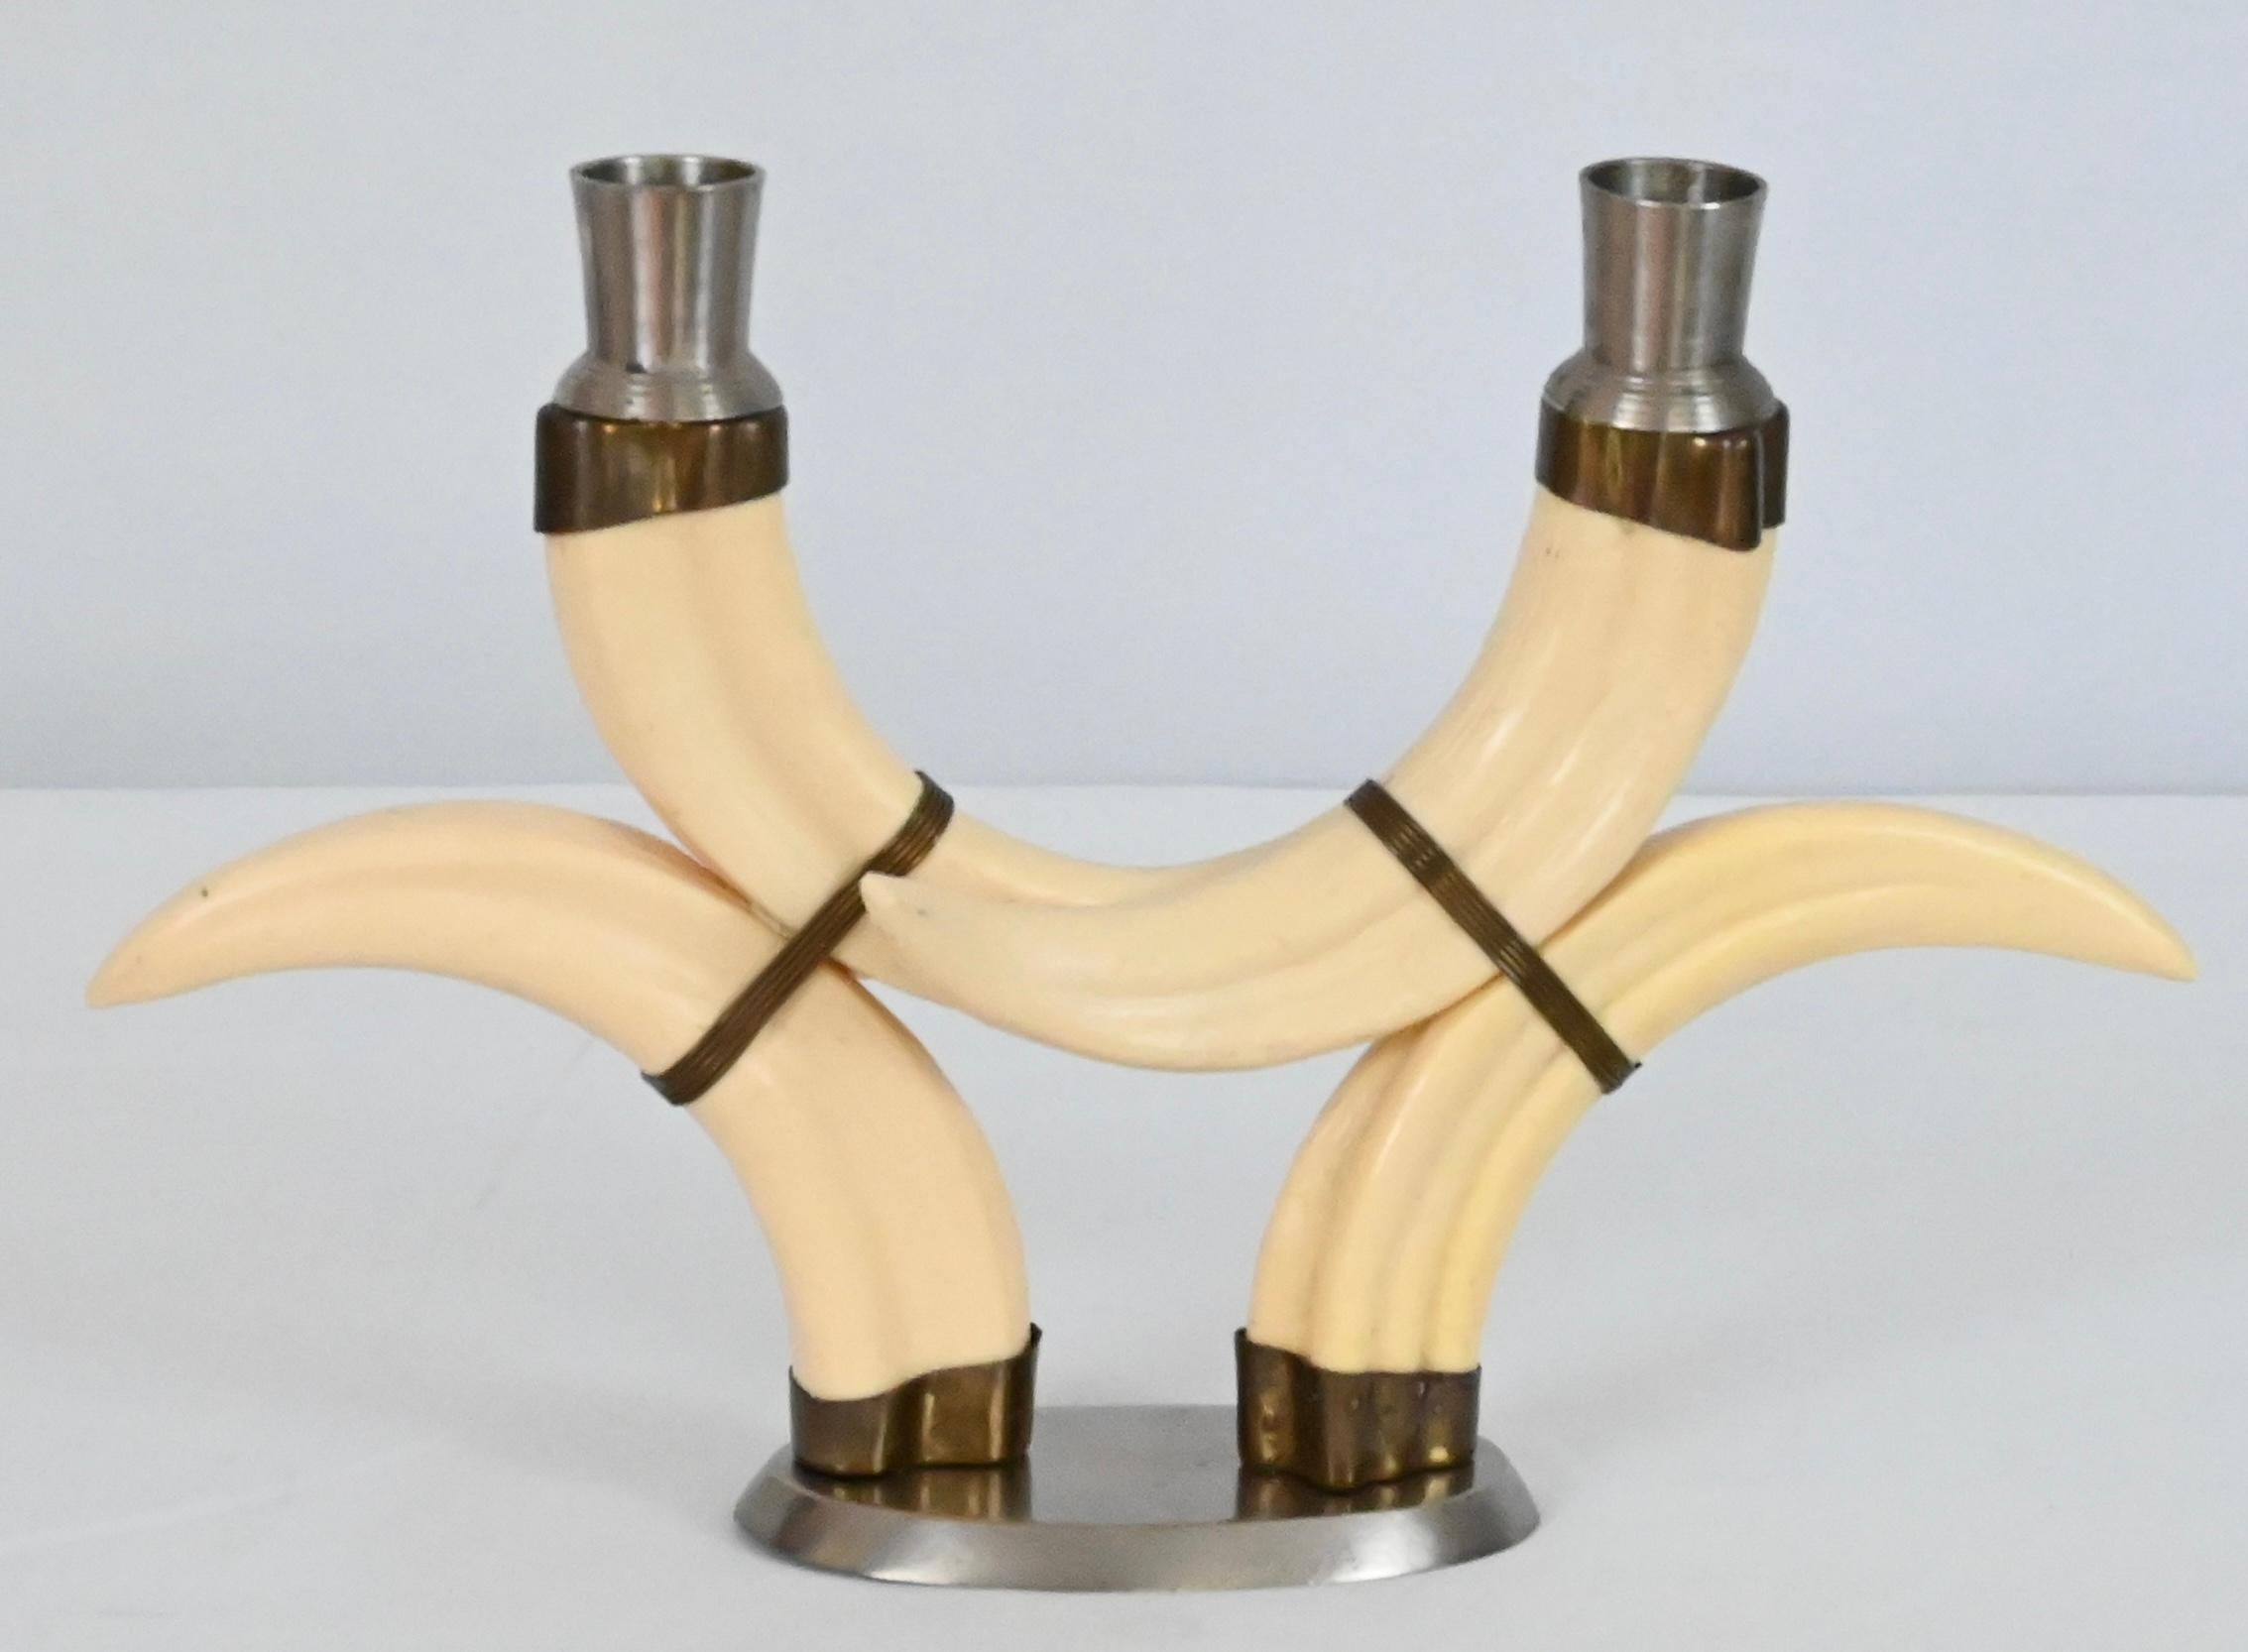 Pair of Beige Faux Horn Candlesticks Mounted in Nickel In Good Condition For Sale In Miami, FL